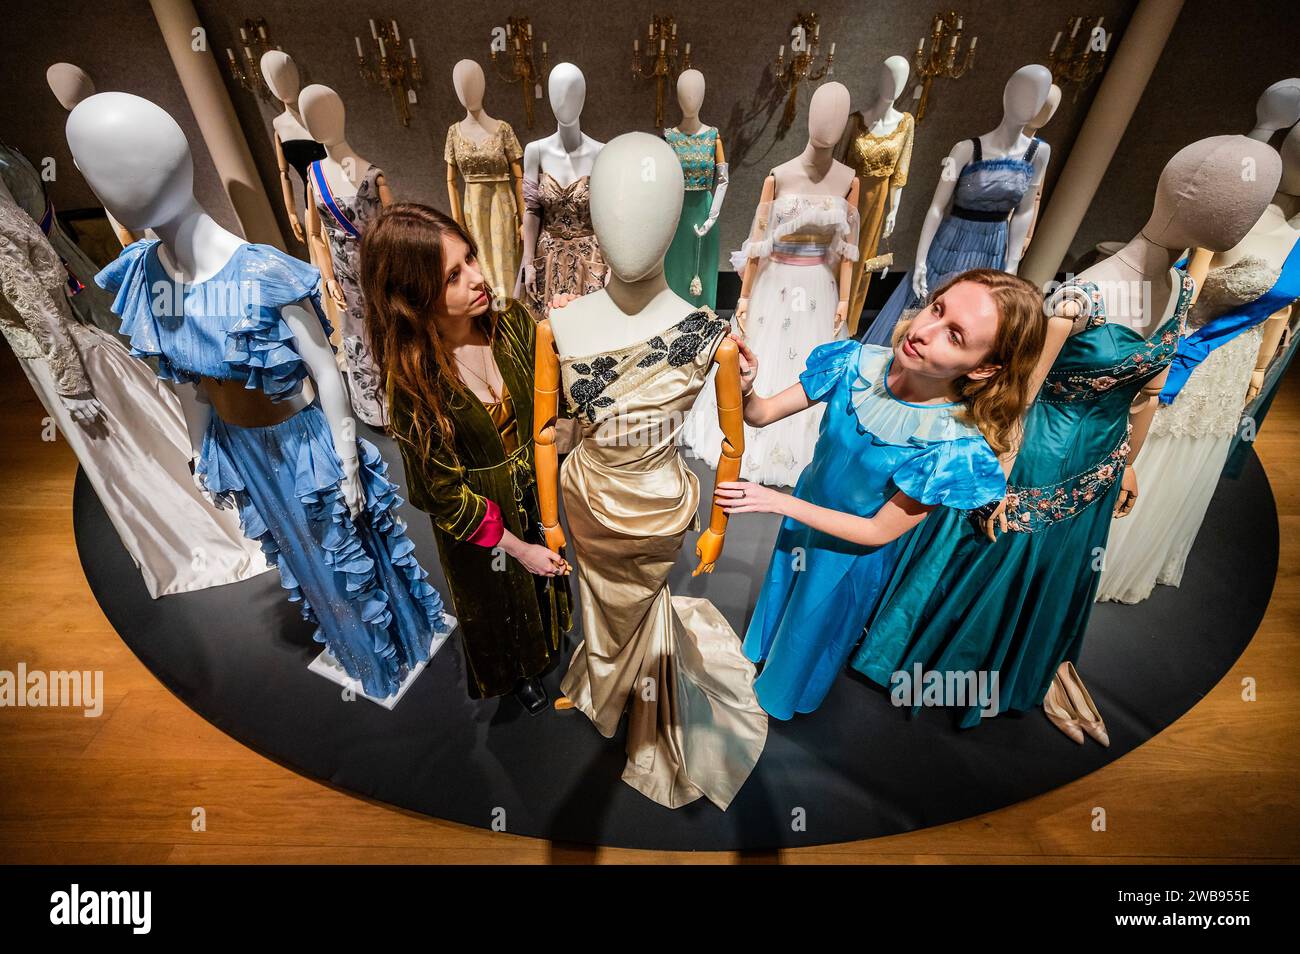 London, UK. 9 Jan 2024. Some of the many dresses including a Full-length teal ballgown, featured in the promotional poster ( © Netflix 2020, Inc.) worn by ClareFoy in Season 2 Episode 1 and Episode 4. Estimate: £3,000-5,000 and one worn by Lia Williams (as Wallis Simpson): A full-length column ballgown in Season 1, Episode 5, 'Smoke and Mirrors', £1,500 - £2,000 - A preview of The Crown Auction at Bonhams New Bond Street, London. More than 450 costumes, sets, and props from the award-winning series The Crown, a Netflix show. Credit: Guy Bell/Alamy Live News Stock Photo